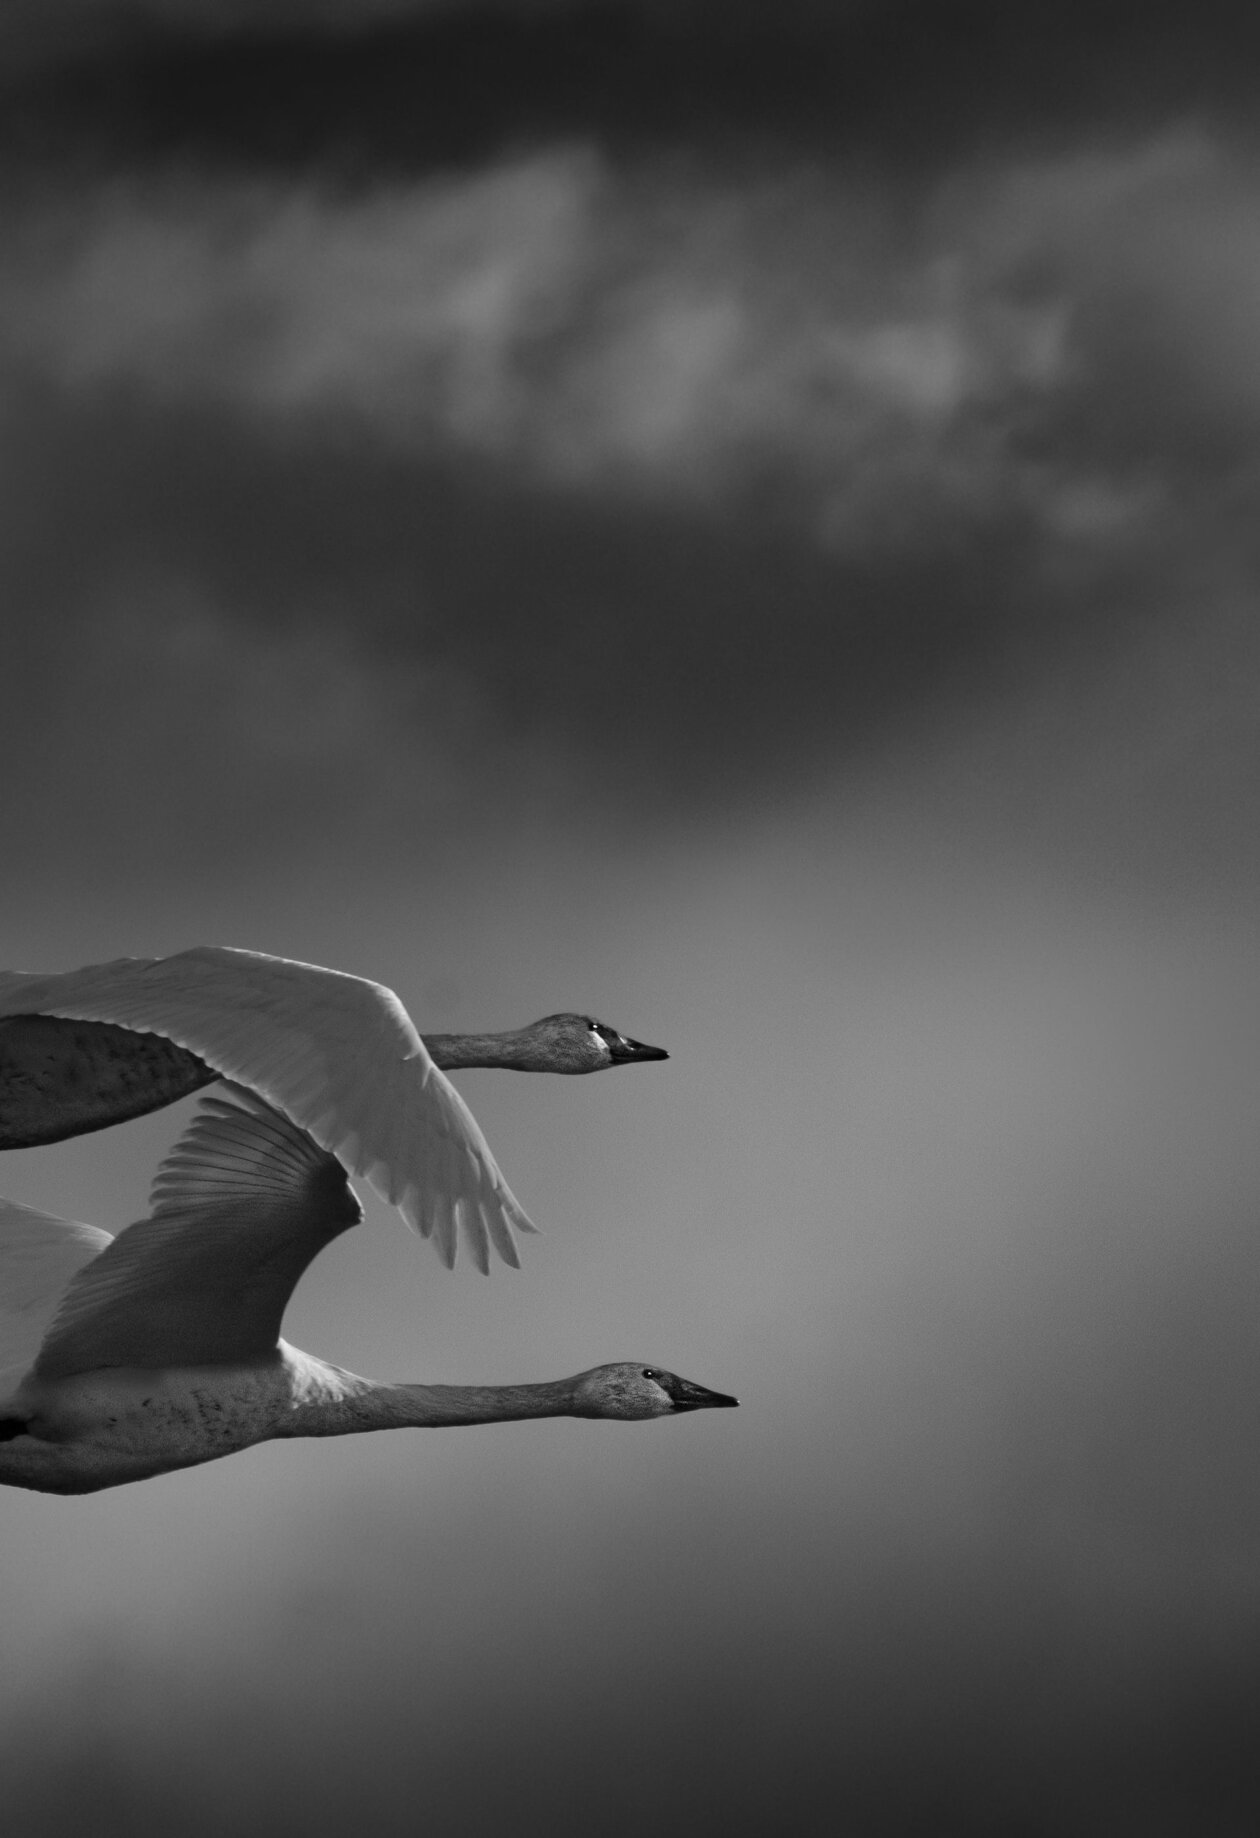 Flying With Swans A Poetic Fine Art Photography Series By Darrel Rhea 5